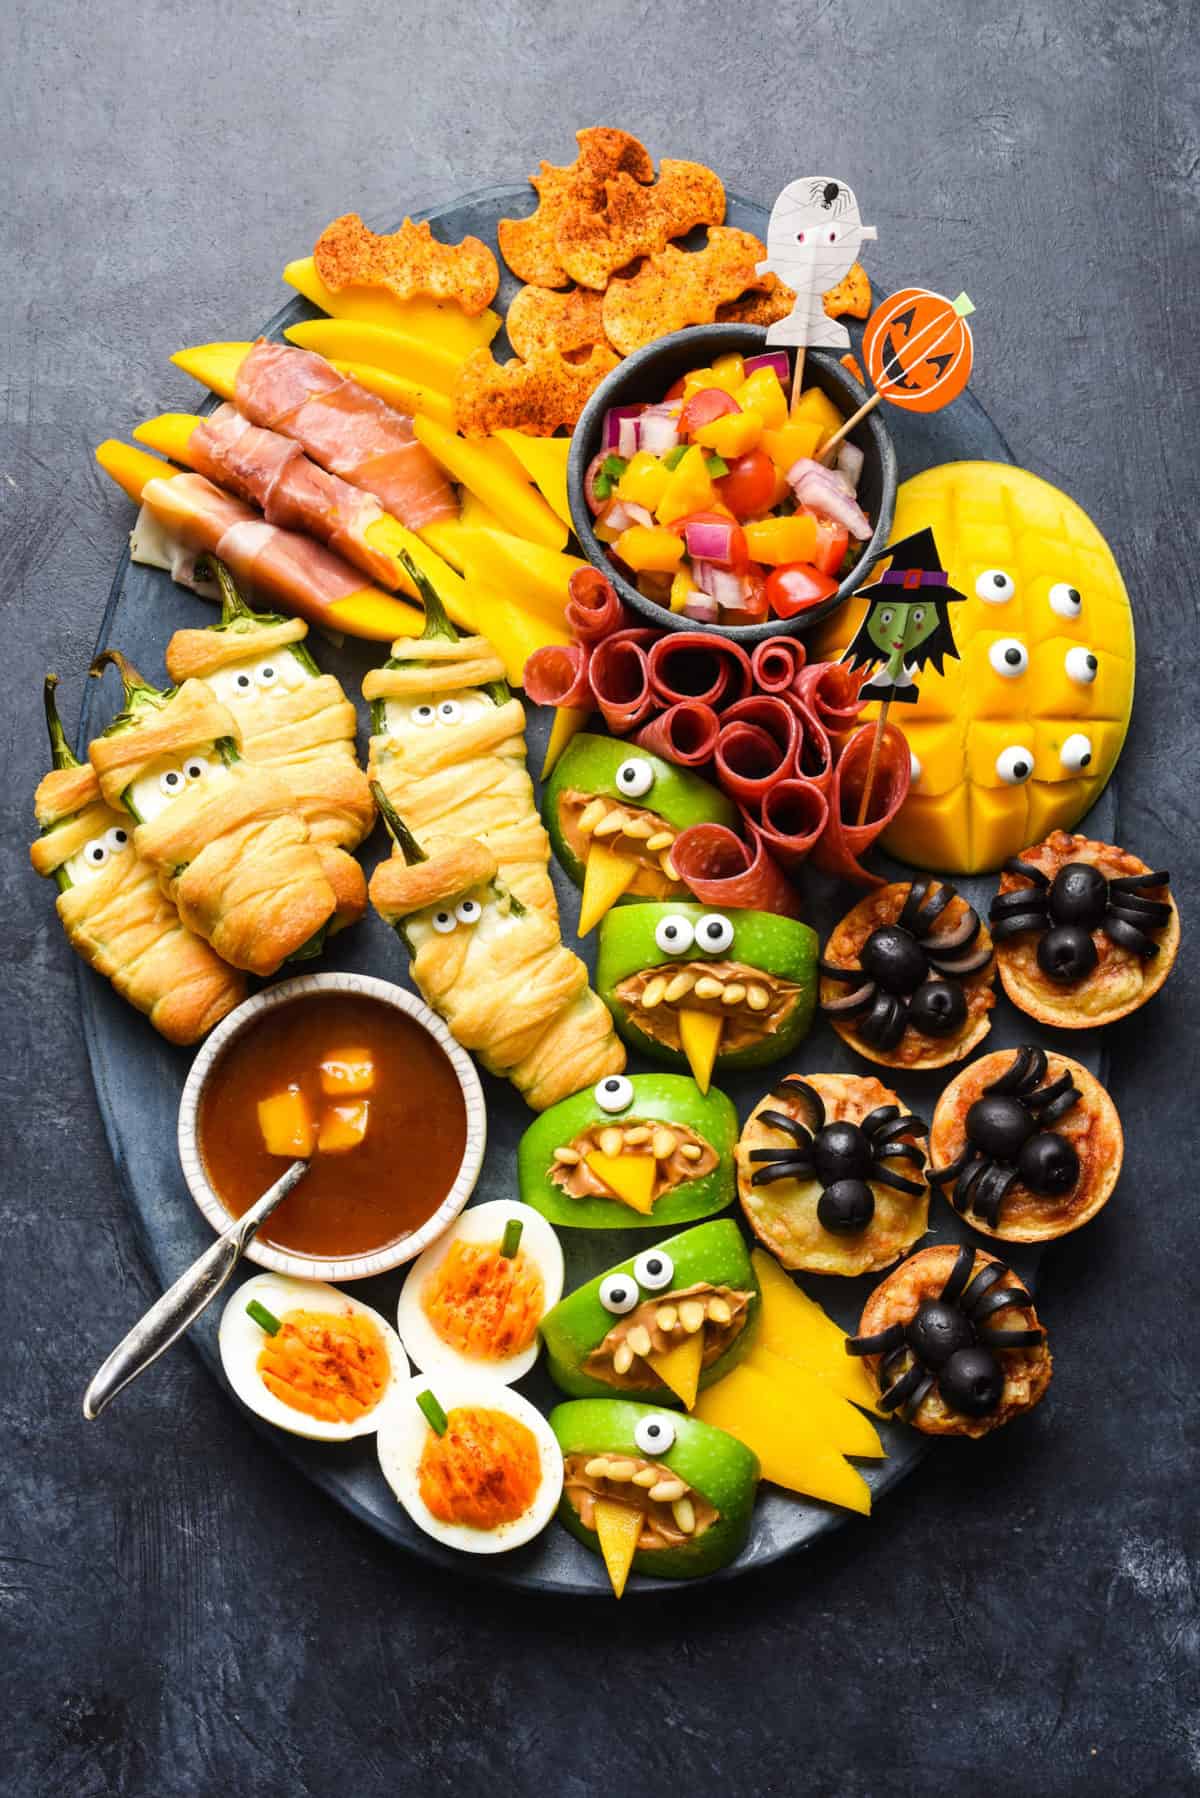 13 Easy Halloween Food Ideas For Kids - Oh, The Things We'll Make!